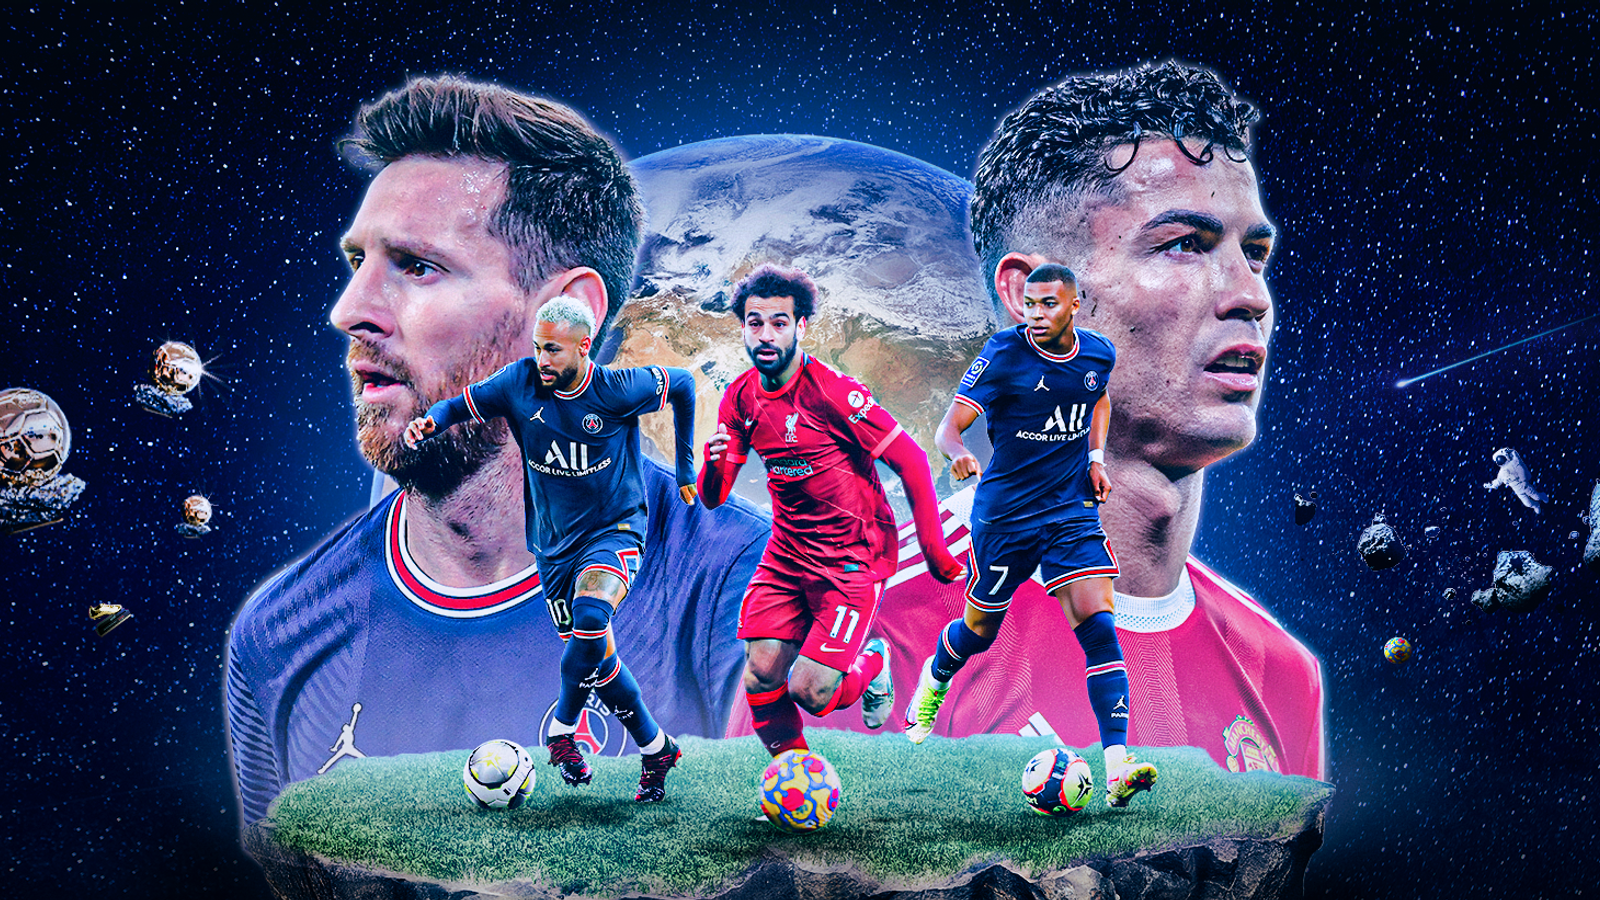 Kylian Mbappe, Mohamed Salah, Erling Haaland vying to usurp Lionel Messi and Cristiano Ronaldo as world's best